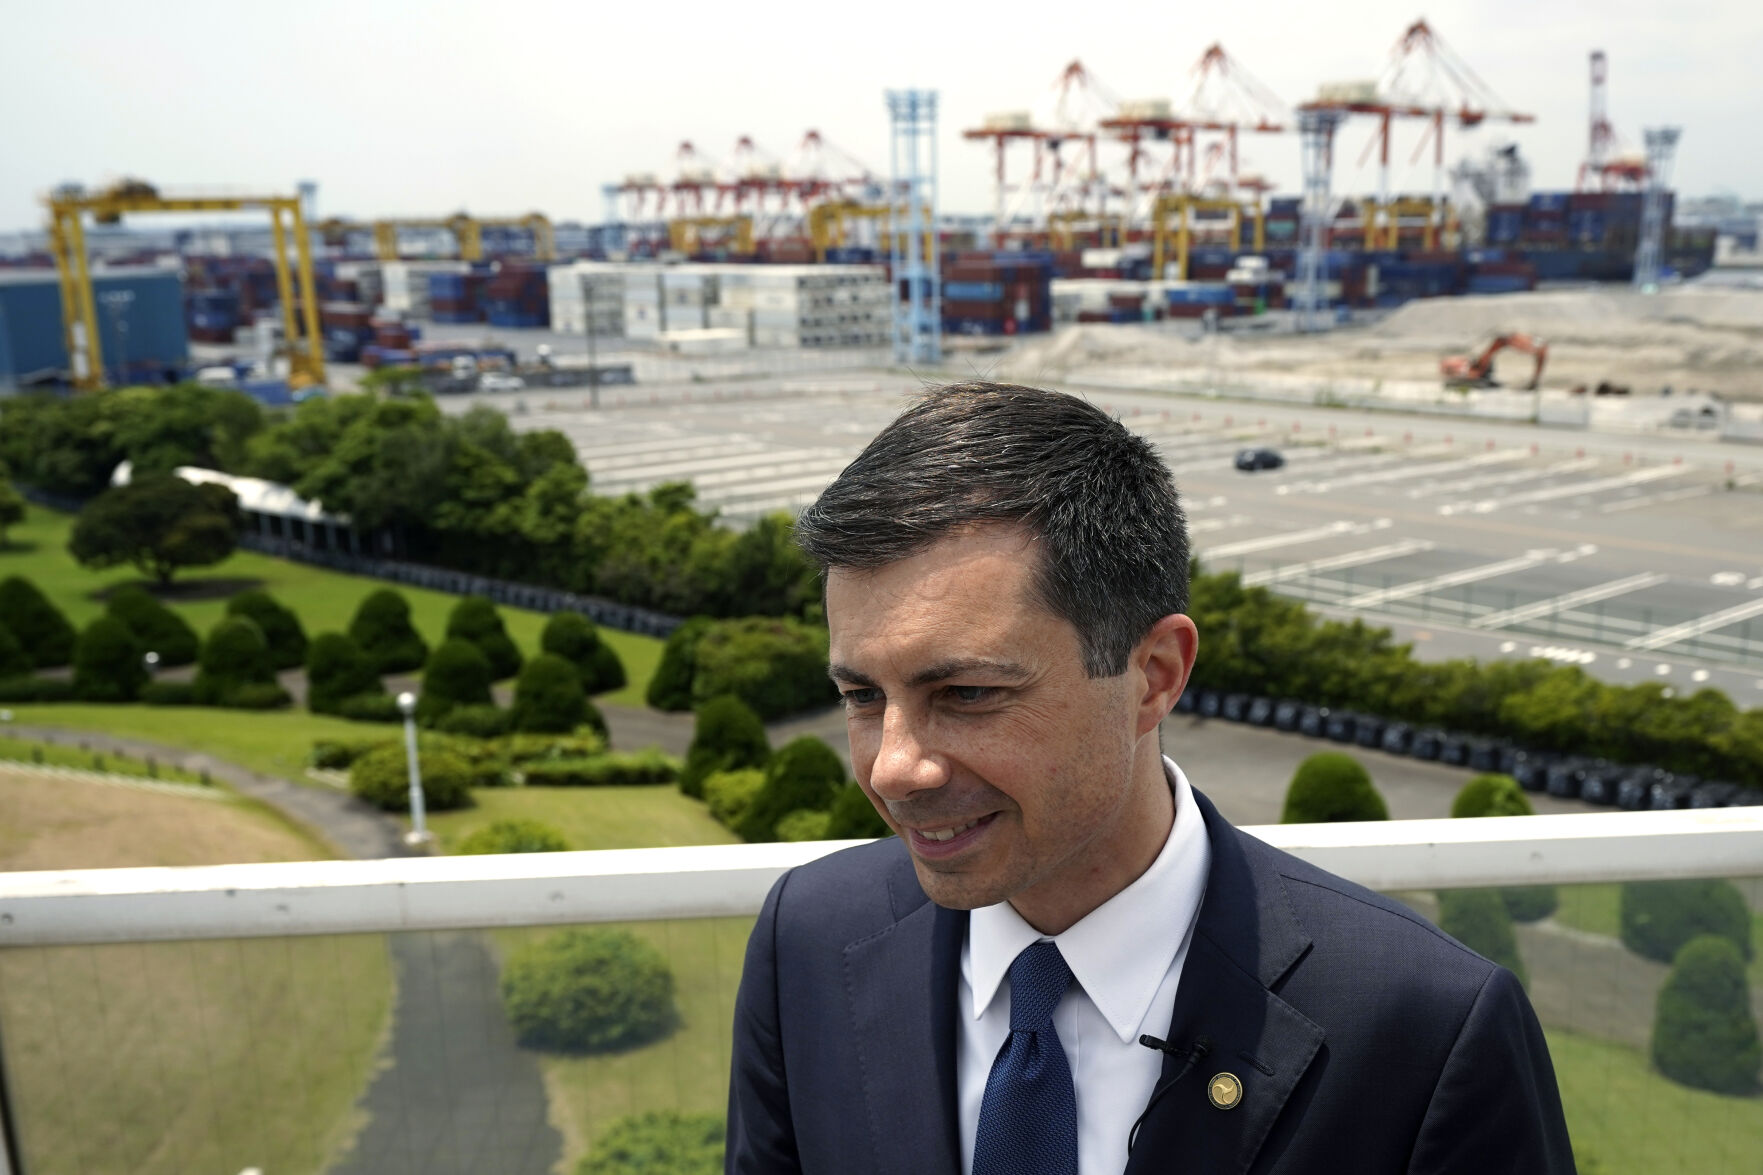 <p>U.S. Secretary of Transportation Pete Buttigieg speaks during an interview with the Associated Press after touring Yokohama Port which includes a visit to a construction site for a new pier that will accommodate larger ships coming from the U.S. on Monday, June 19, 2023, in Tokyo. (AP Photo/Eugene Hoshiko)</p>   PHOTO CREDIT: Eugene Hoshiko 